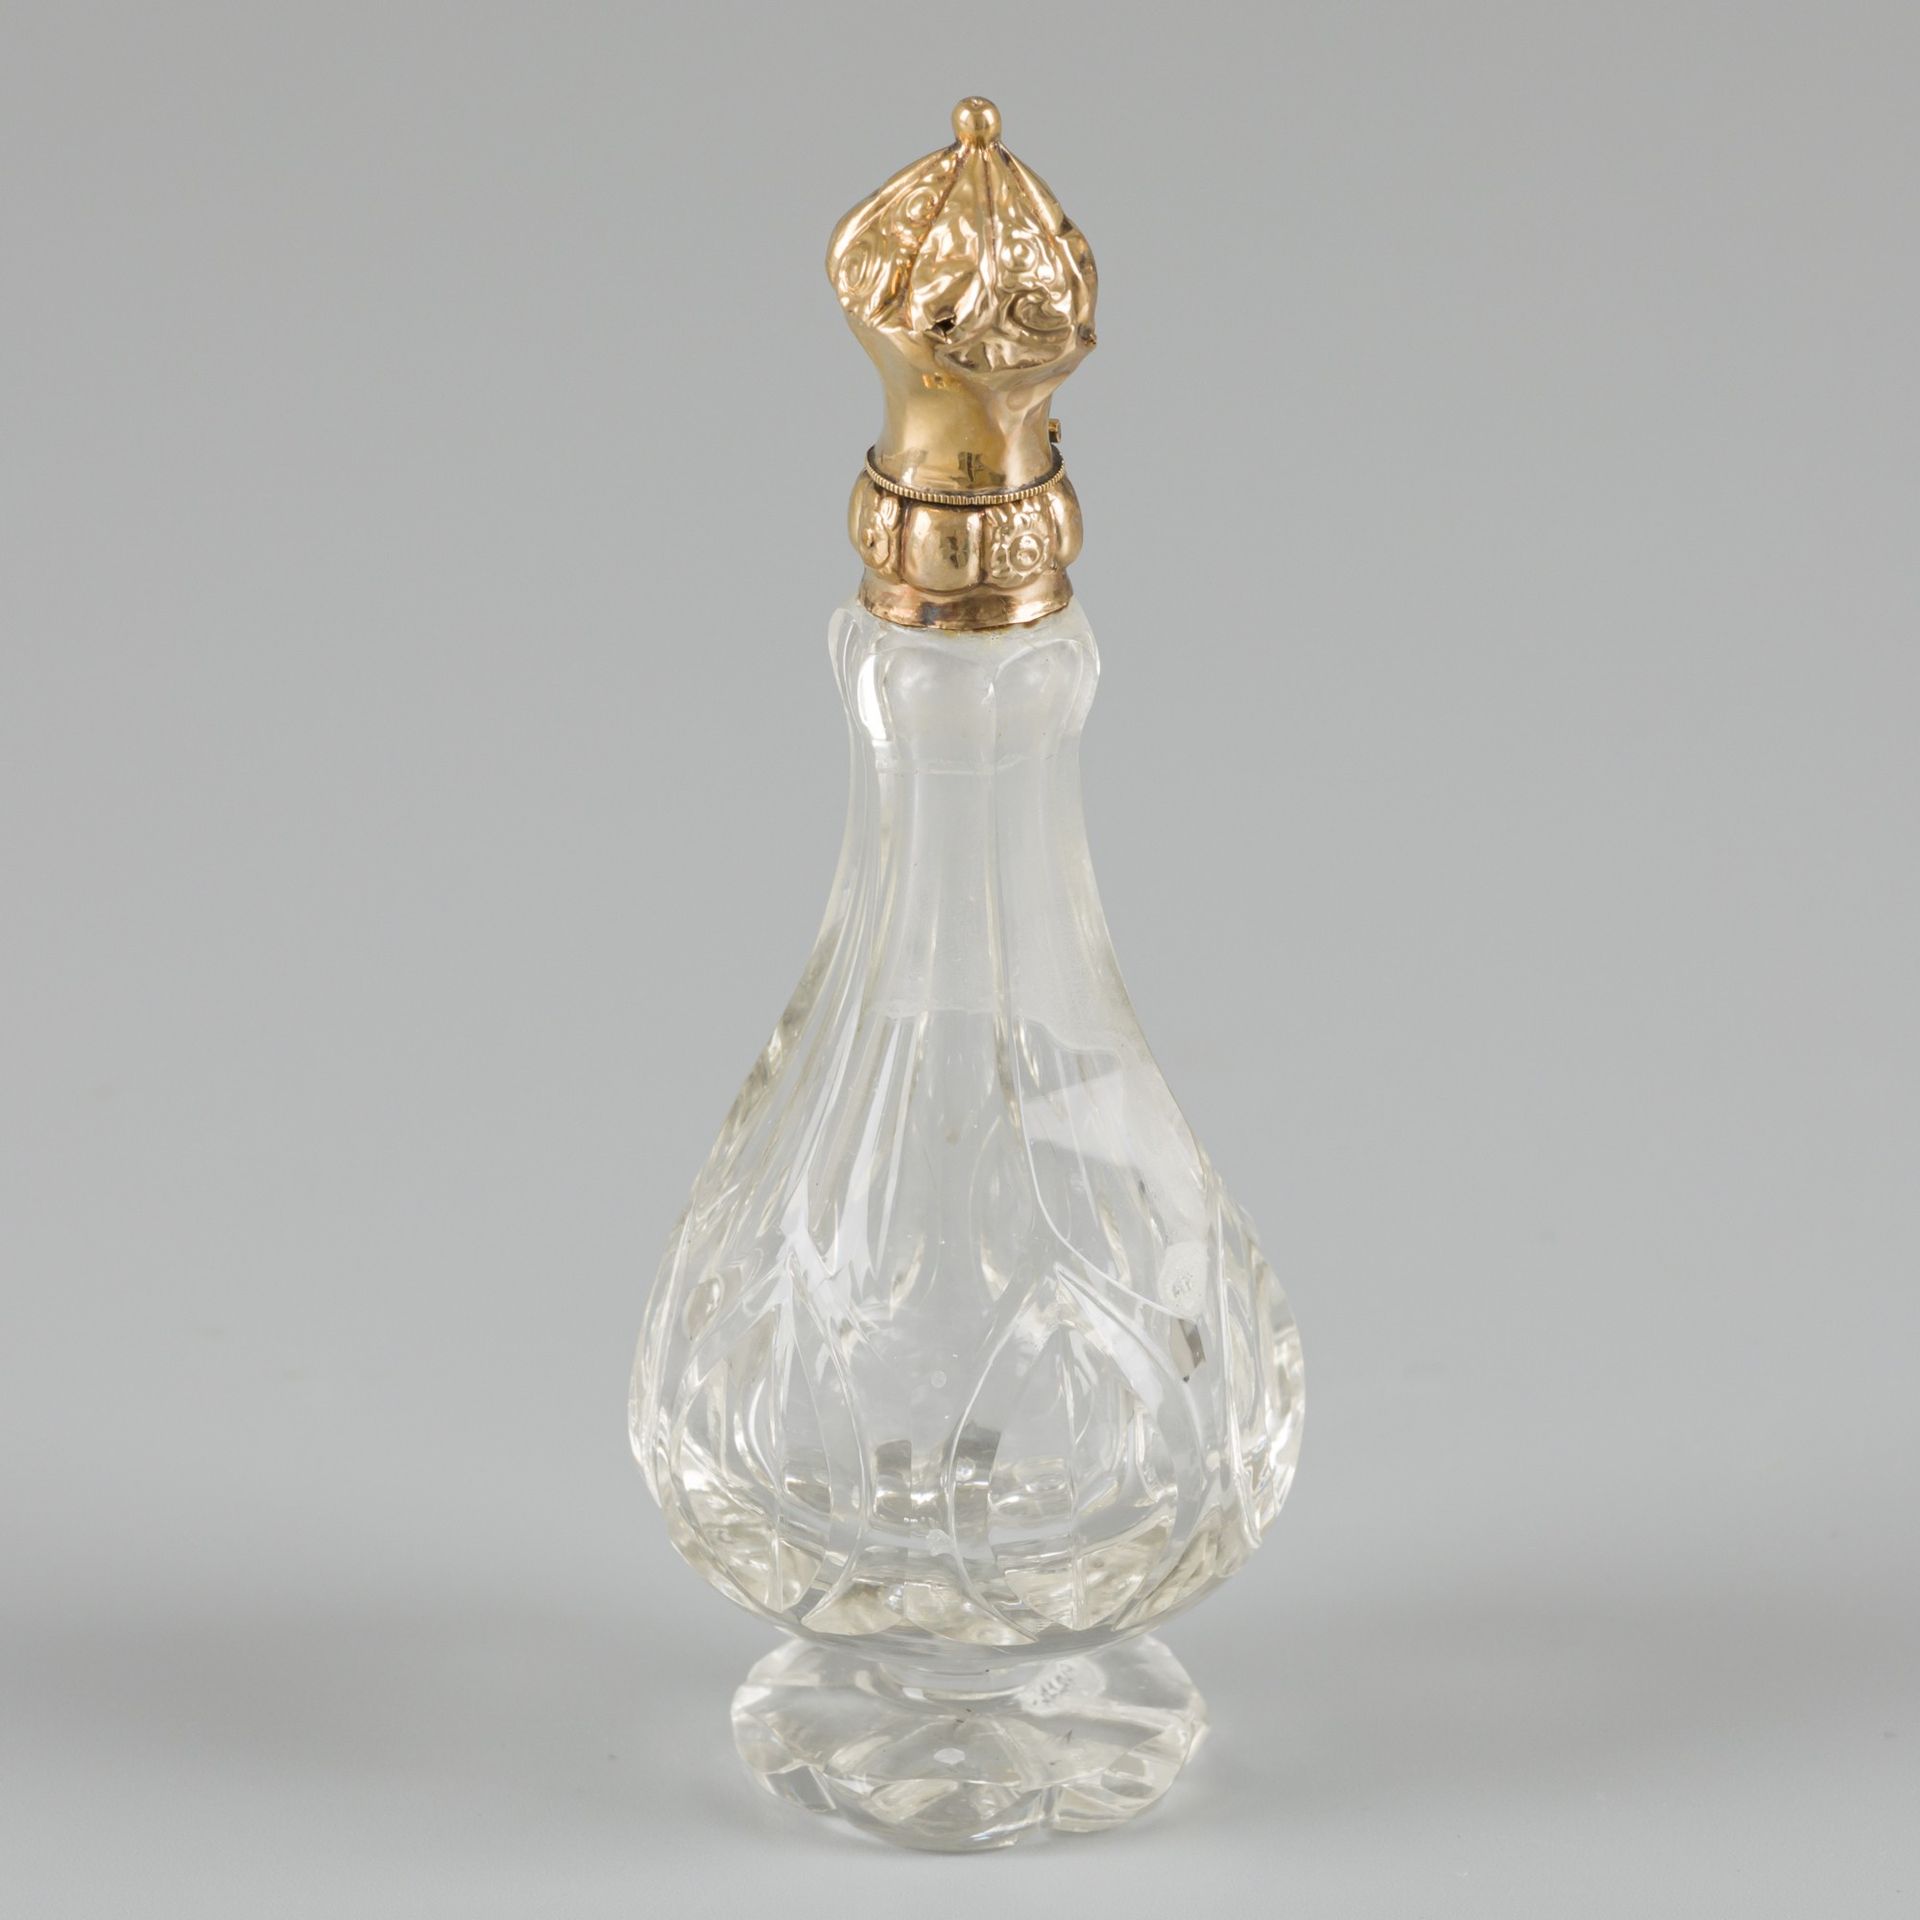 Perfume bottle gold. Cut crystal glass bottle with gold cap with embossed decora&hellip;